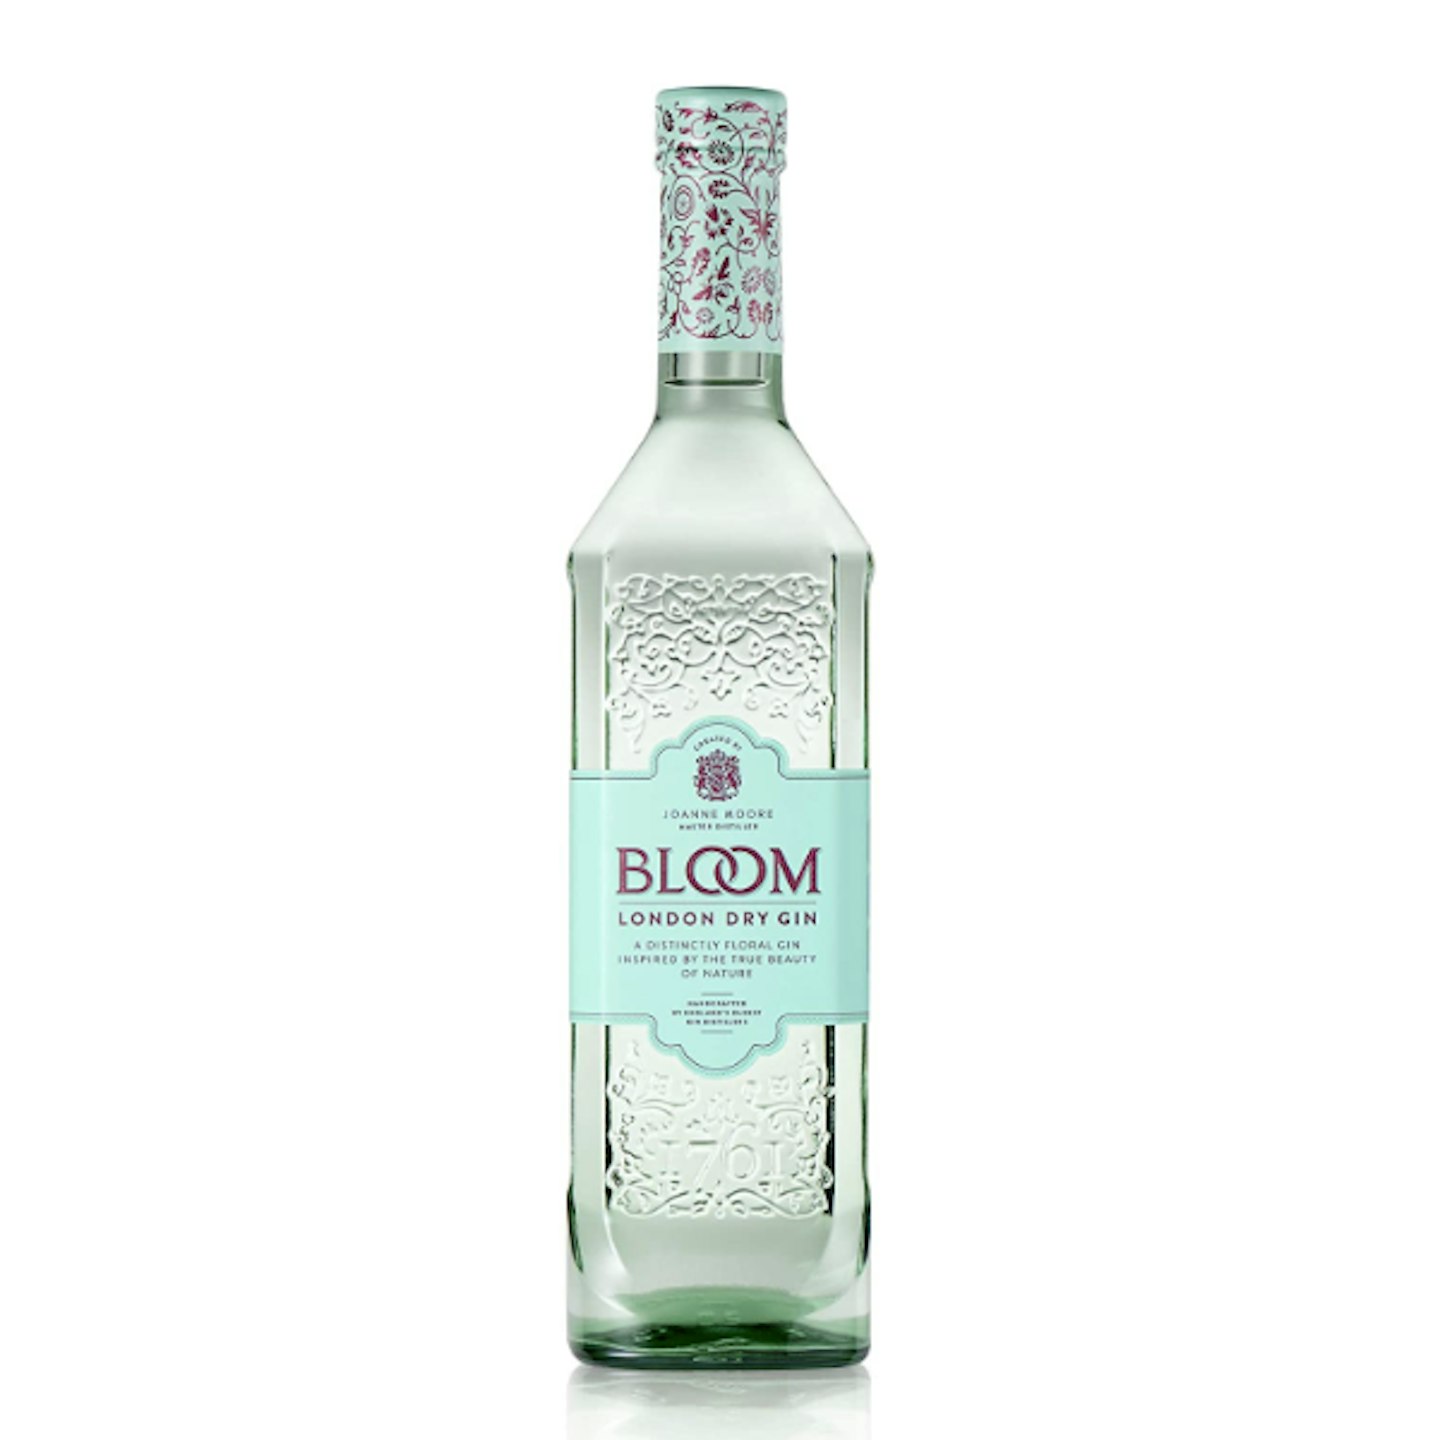 Bloom London Dry Gin with Floral Citrus Botanicals